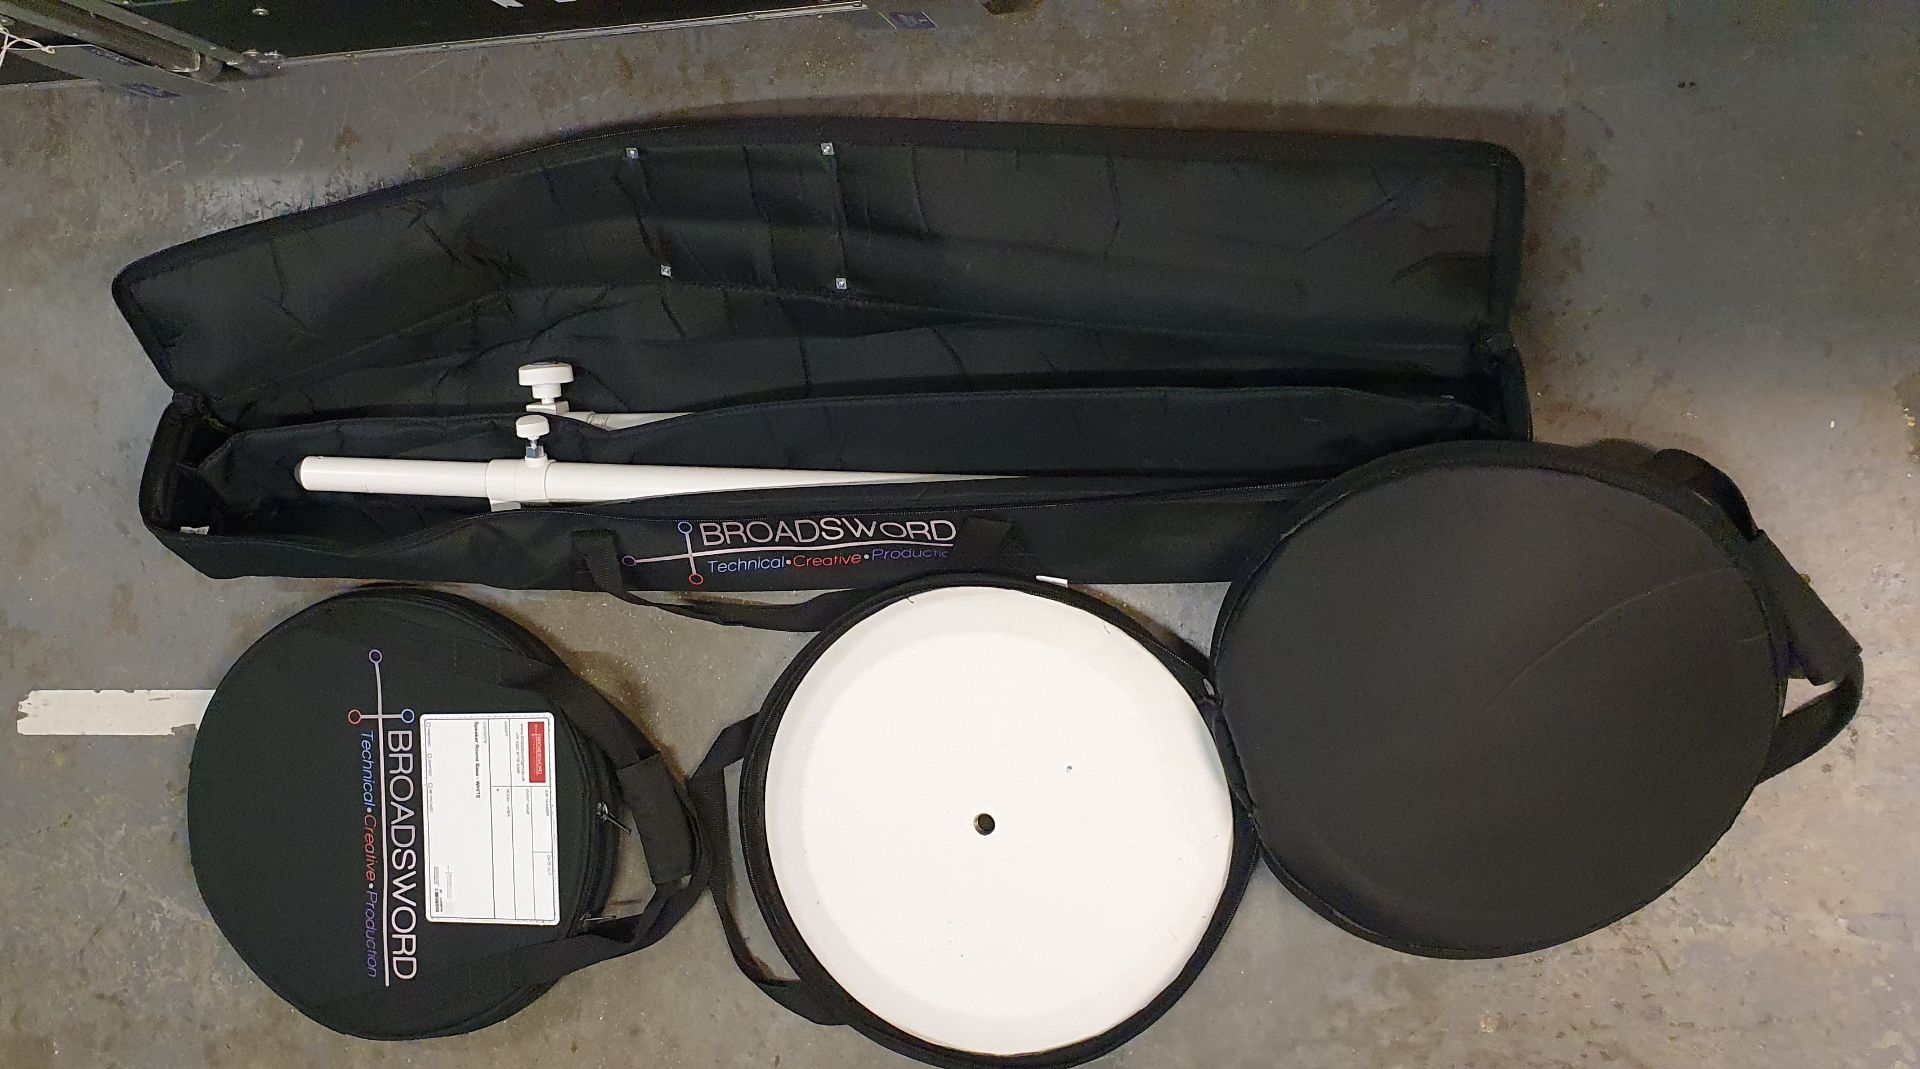 A Pair of K+M White Speaker Round Base Stands comprising: 2 poles and 2 bases with carry bags. - Image 2 of 2